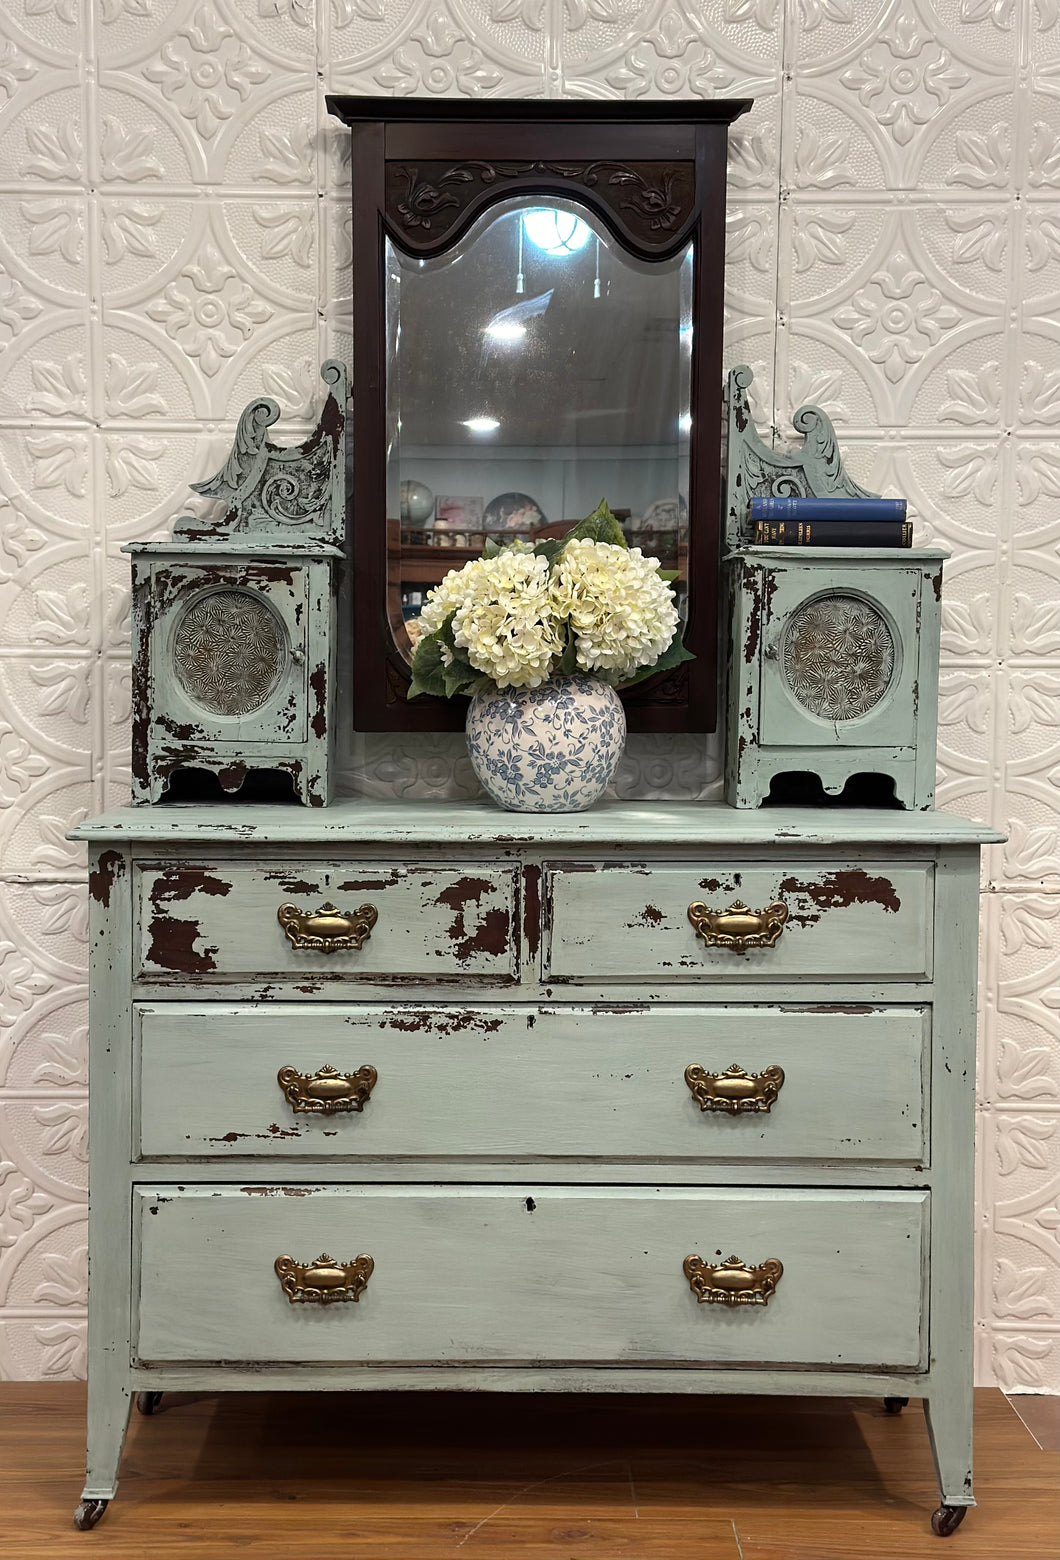 Antique Dresser with Glove Boxes and Mirror